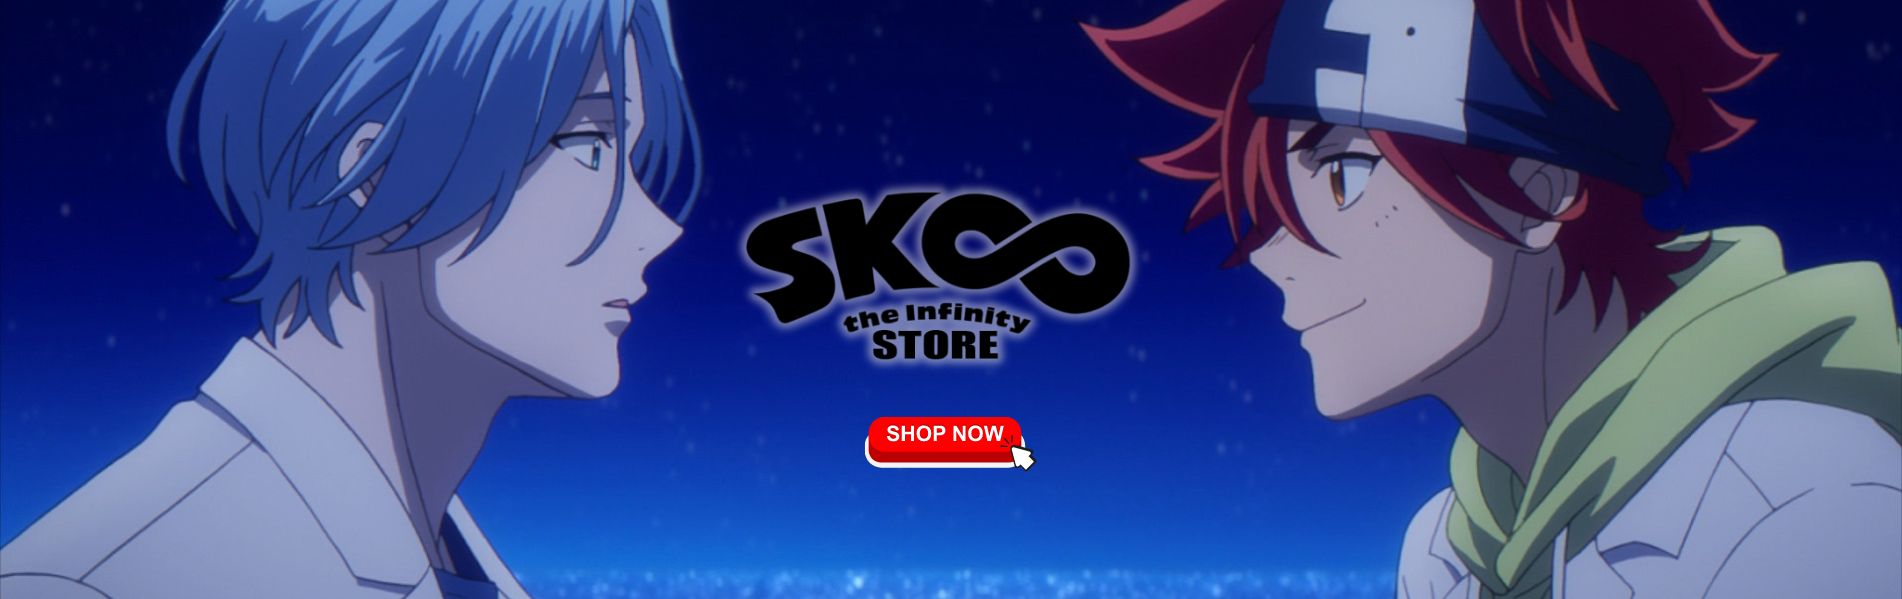 Sk8 Store Banner - SK8 the Infinity Store